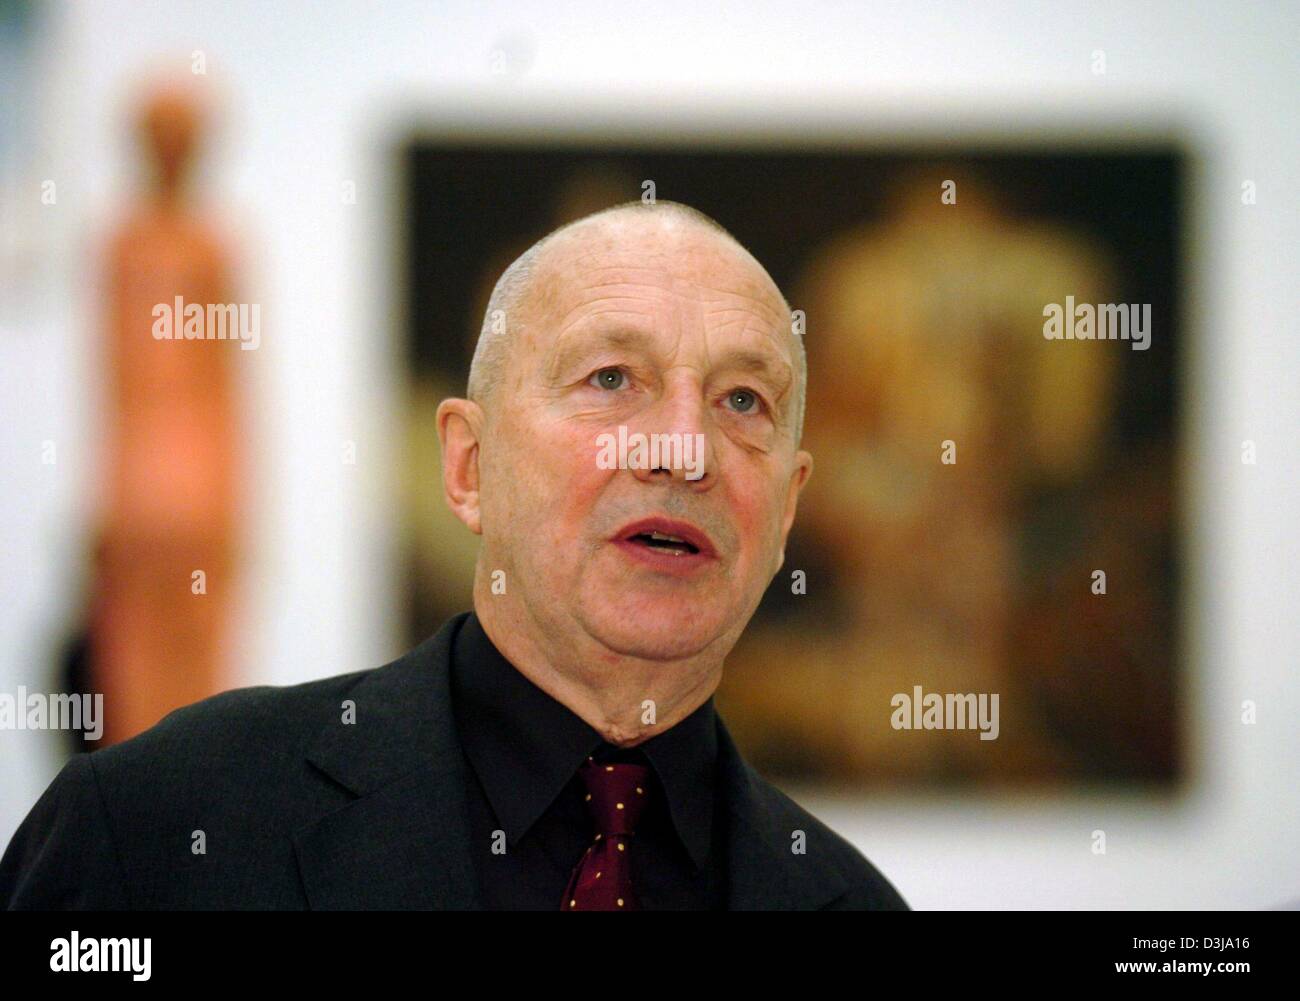 German artist Georg Baselitz stands in front of his artwork at the Bundeskunsthalle (federal art hall) in Bonn, Germany, 31 March 2004. The retrospective which will be held at the art hall from 2 April until 8 August 2004, titled 'Pictures That Turn Your Head', is a comprehensive overview of approximately 130 works of art from all areas of Baselitz' creative production from 1959 to Stock Photo